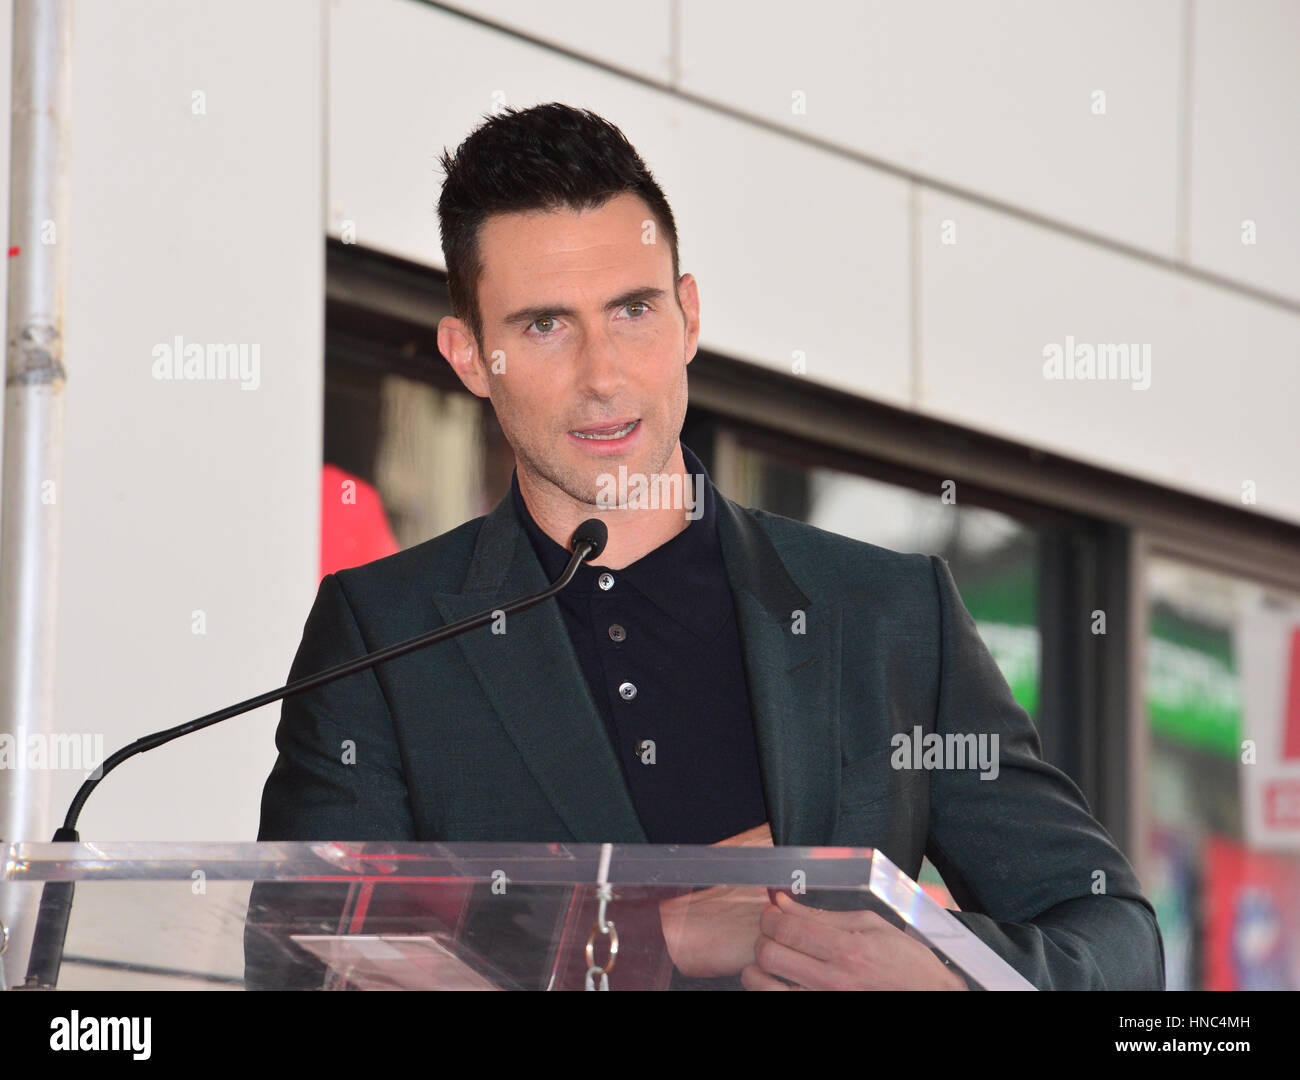 Los Angeles, California, USA. 10th February 2017. Singer Adam Levine at the Hollywood Walk of Fame Star Ceremony honoring singer Adam Levine.  Credit: Sarah Stewart/Alamy Live News Stock Photo